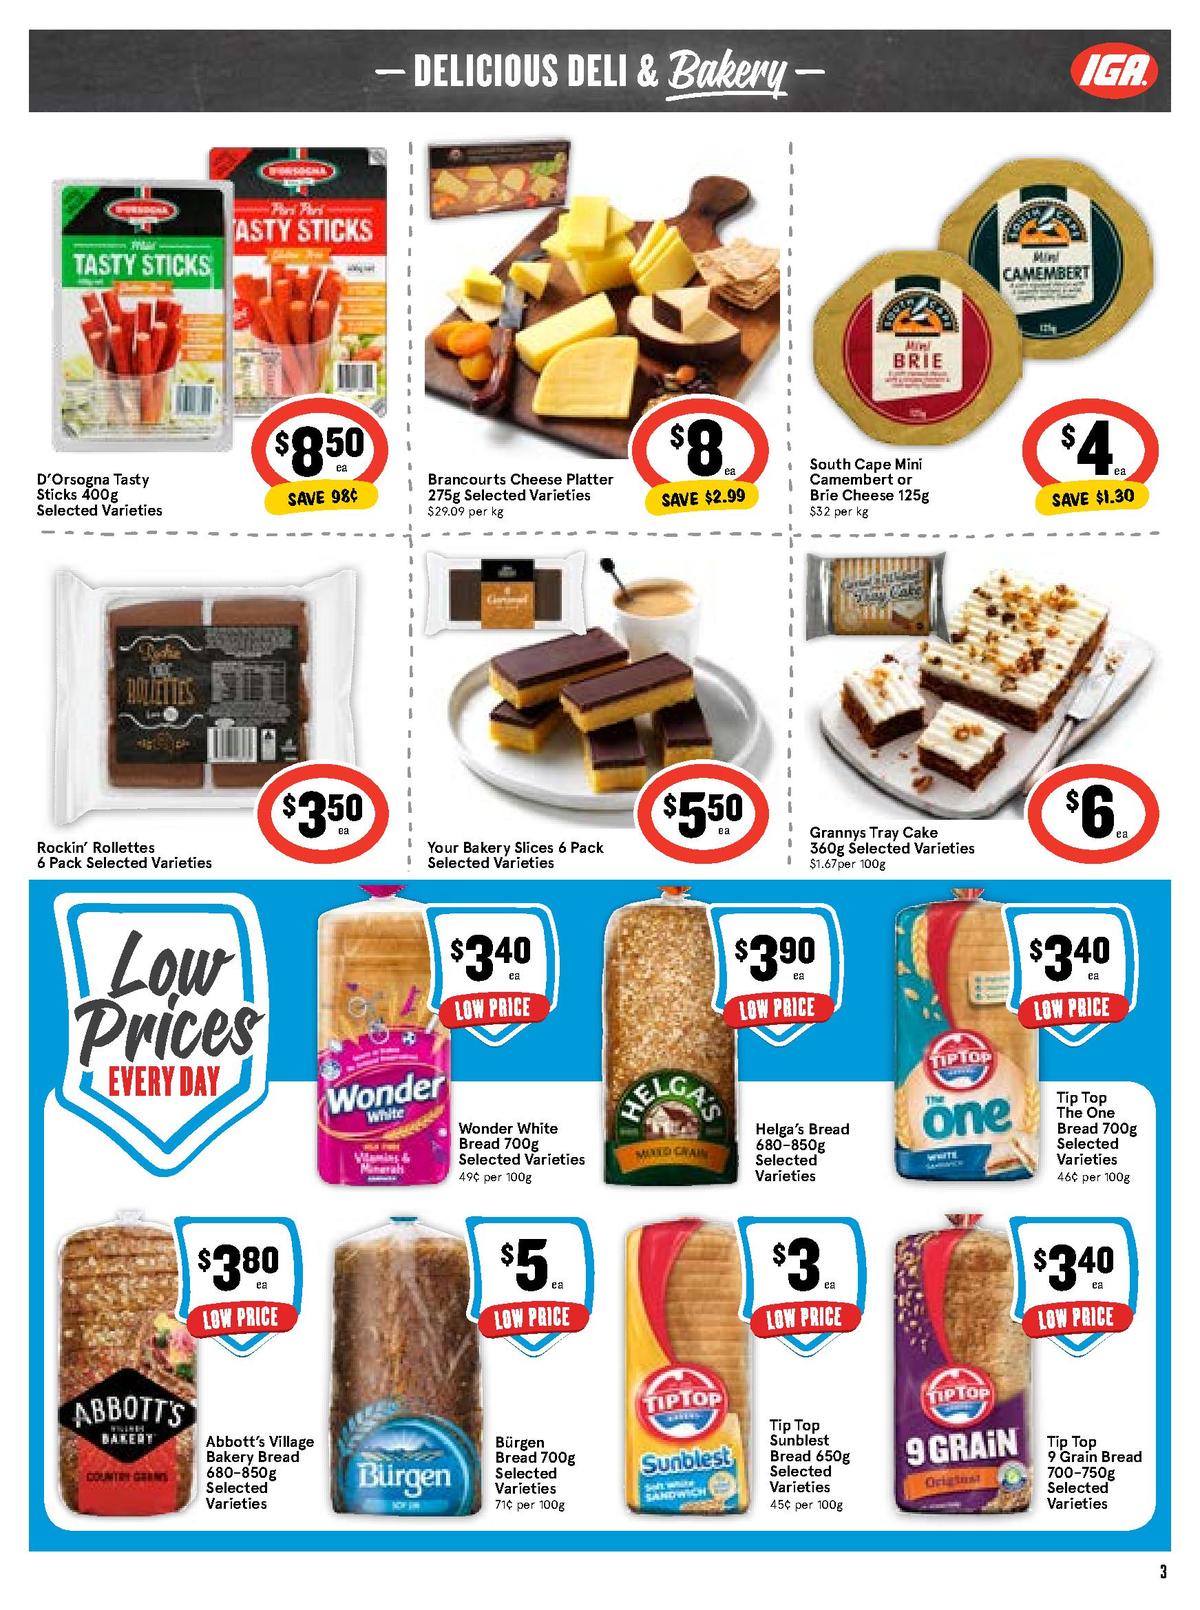 IGA Catalogues from 24 April